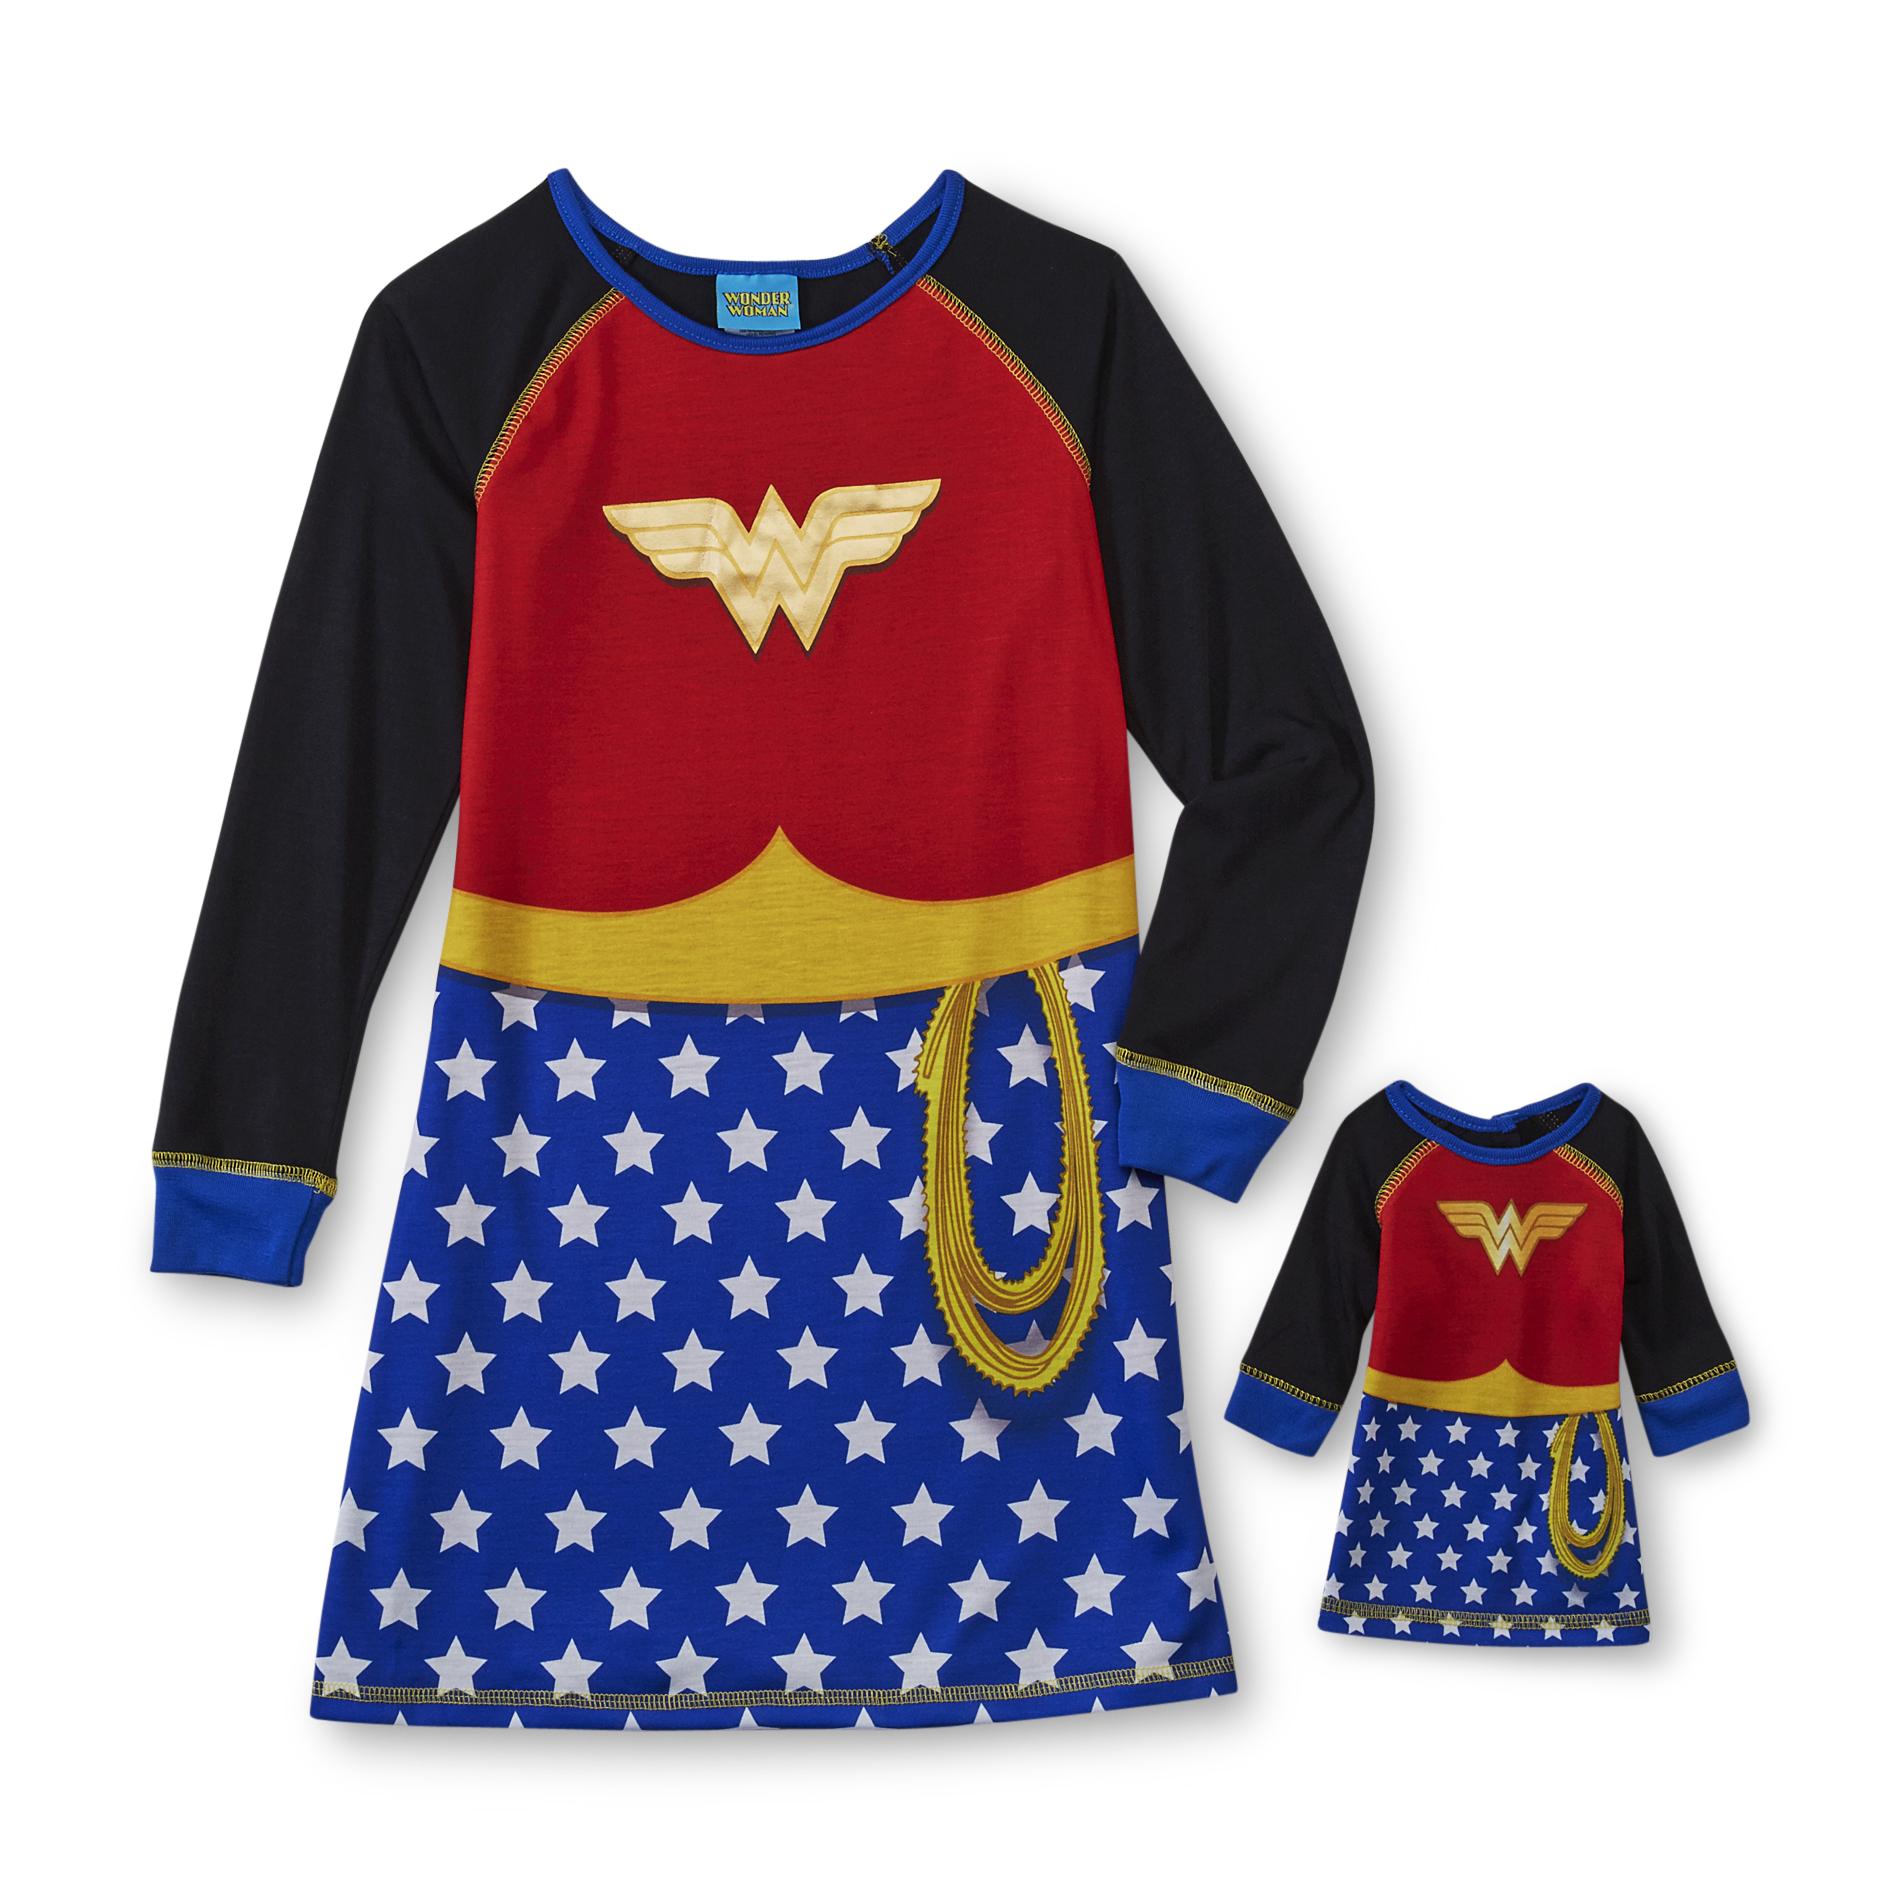 DC Comics Wonder Woman Girl's Nightgown & Doll Outfit